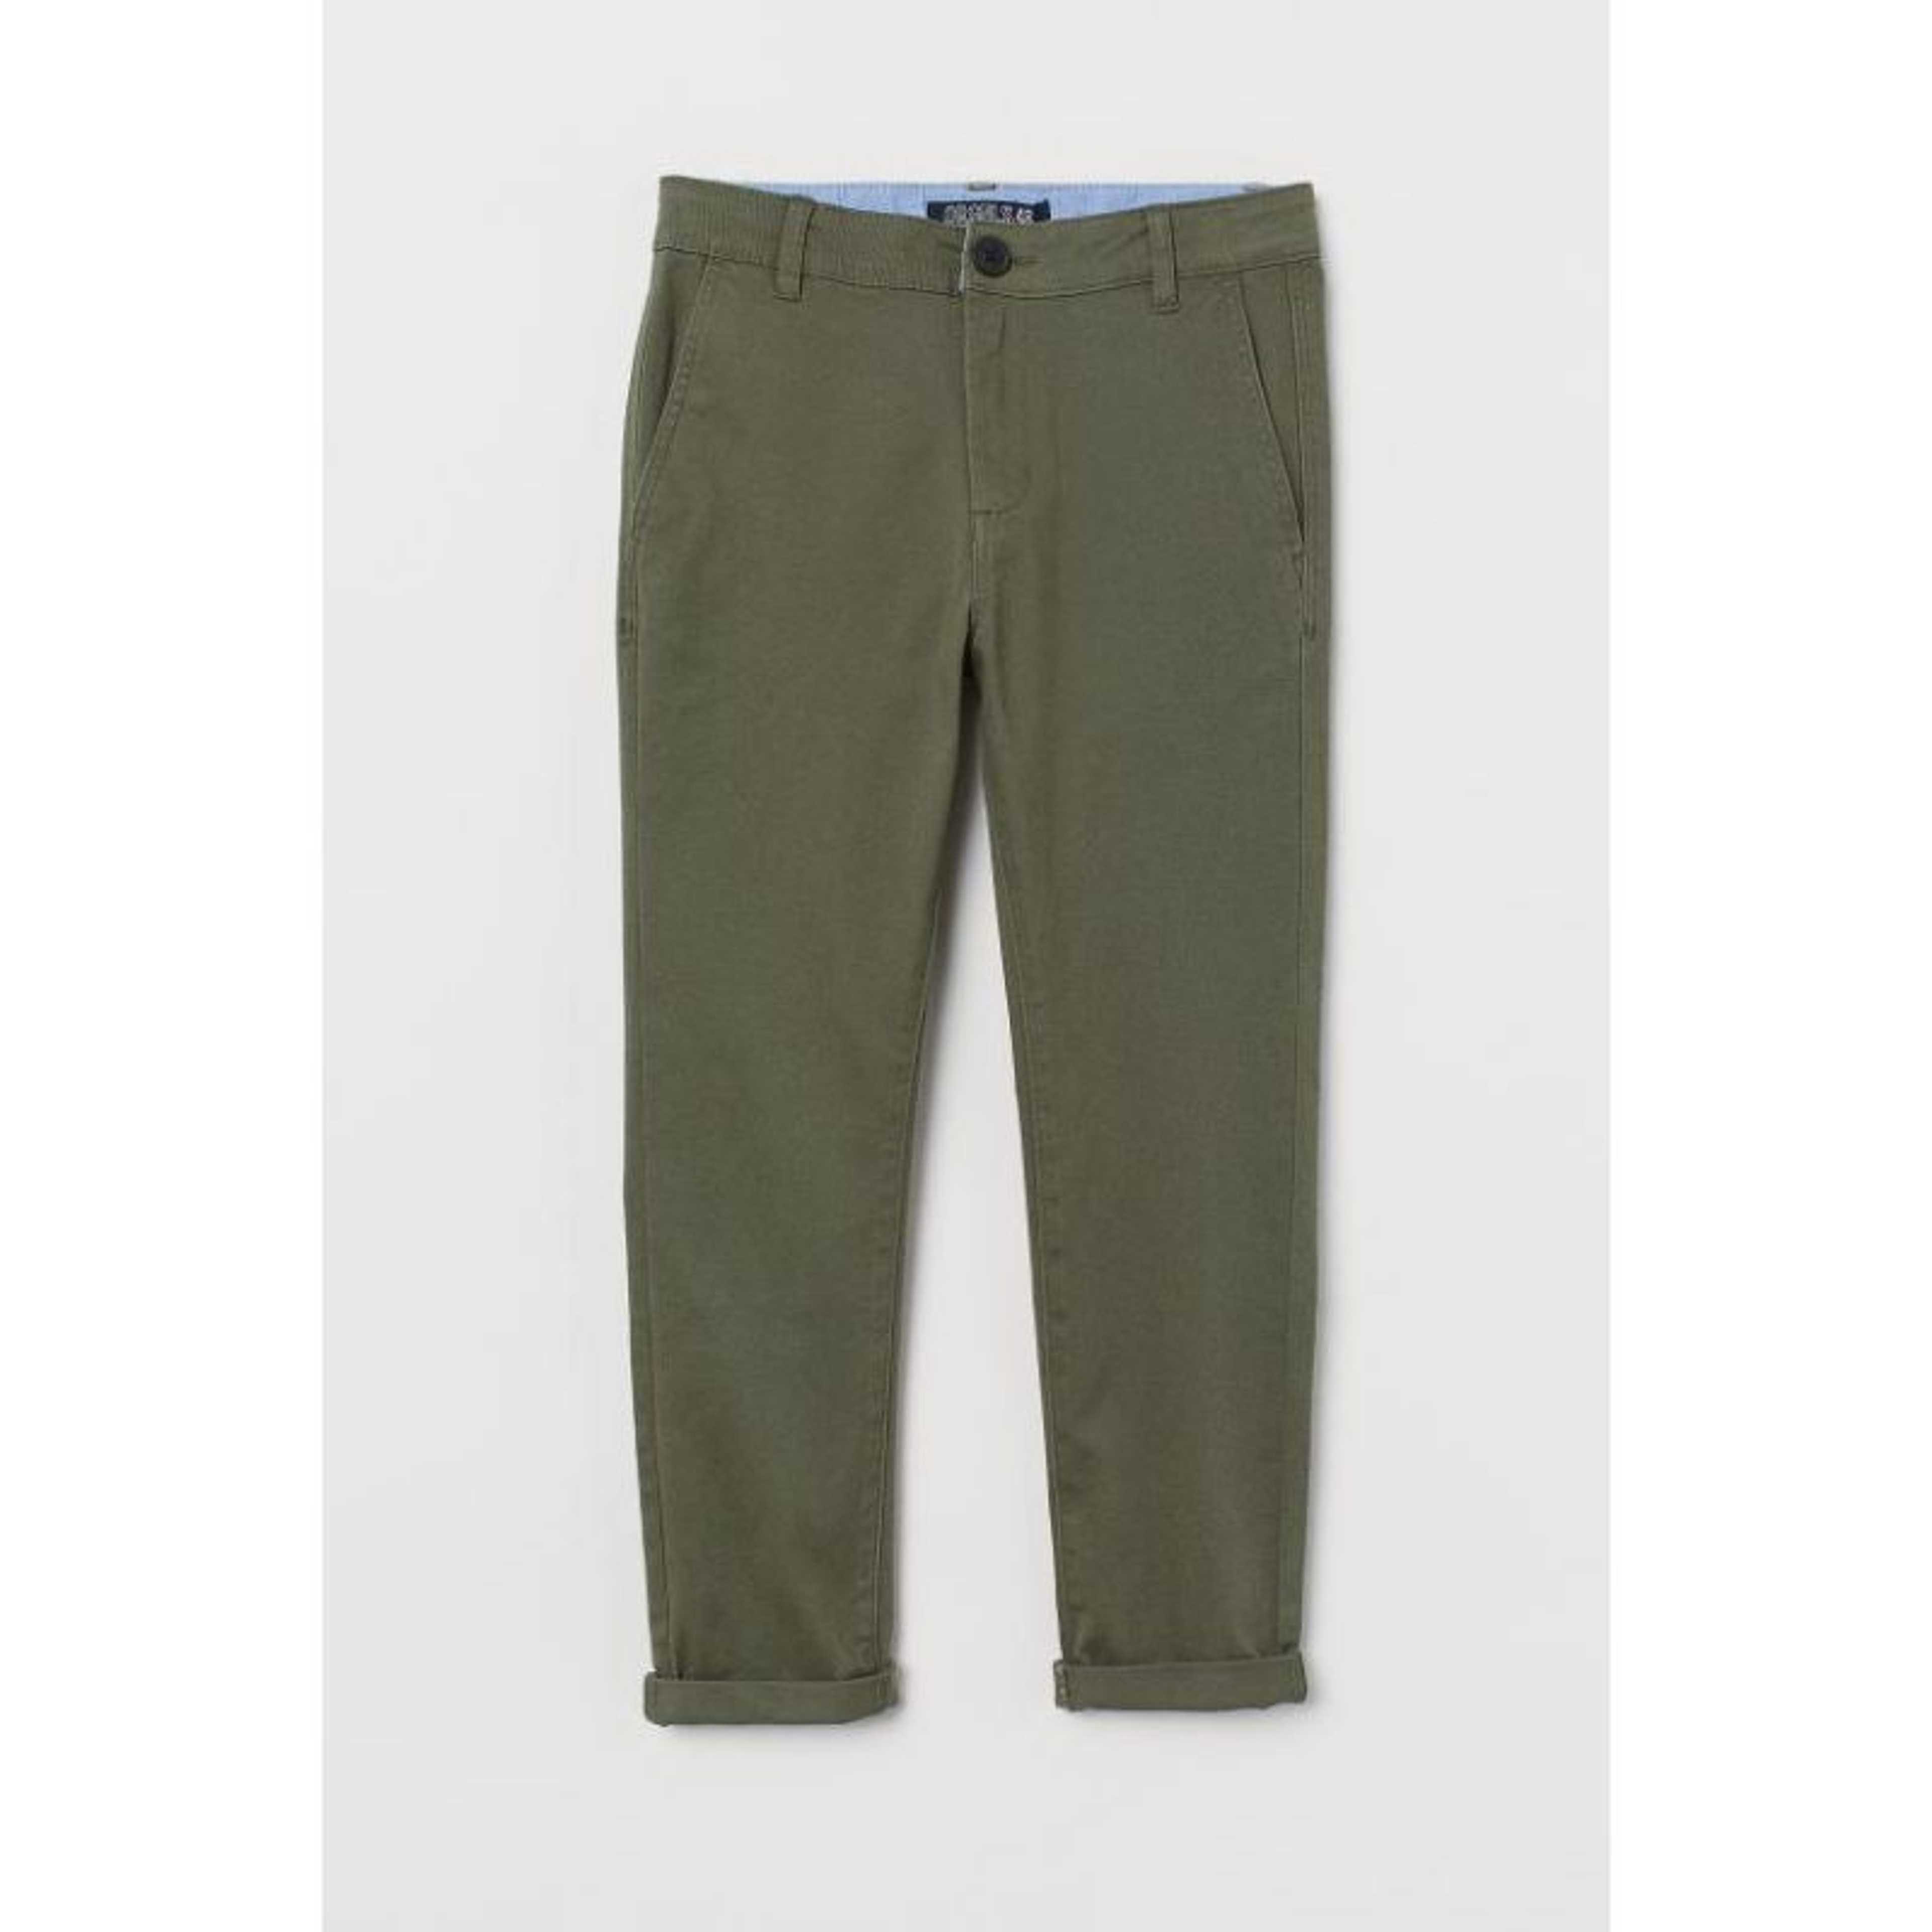 "Slim Fit Cotton Pant For Boys Dark green "